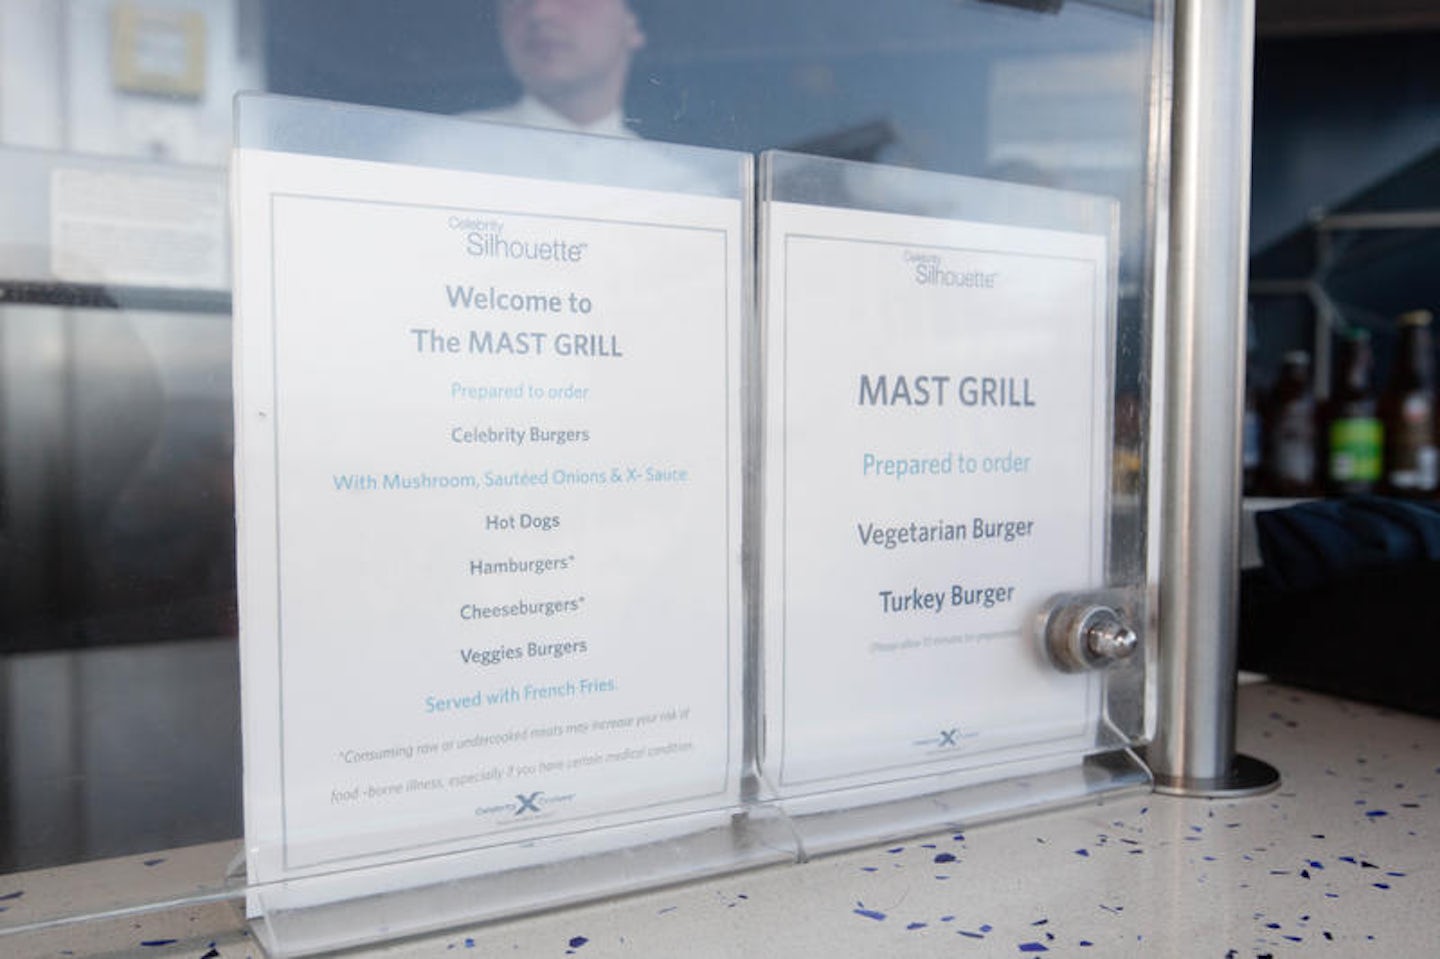 Mast Grill on Celebrity Silhouette